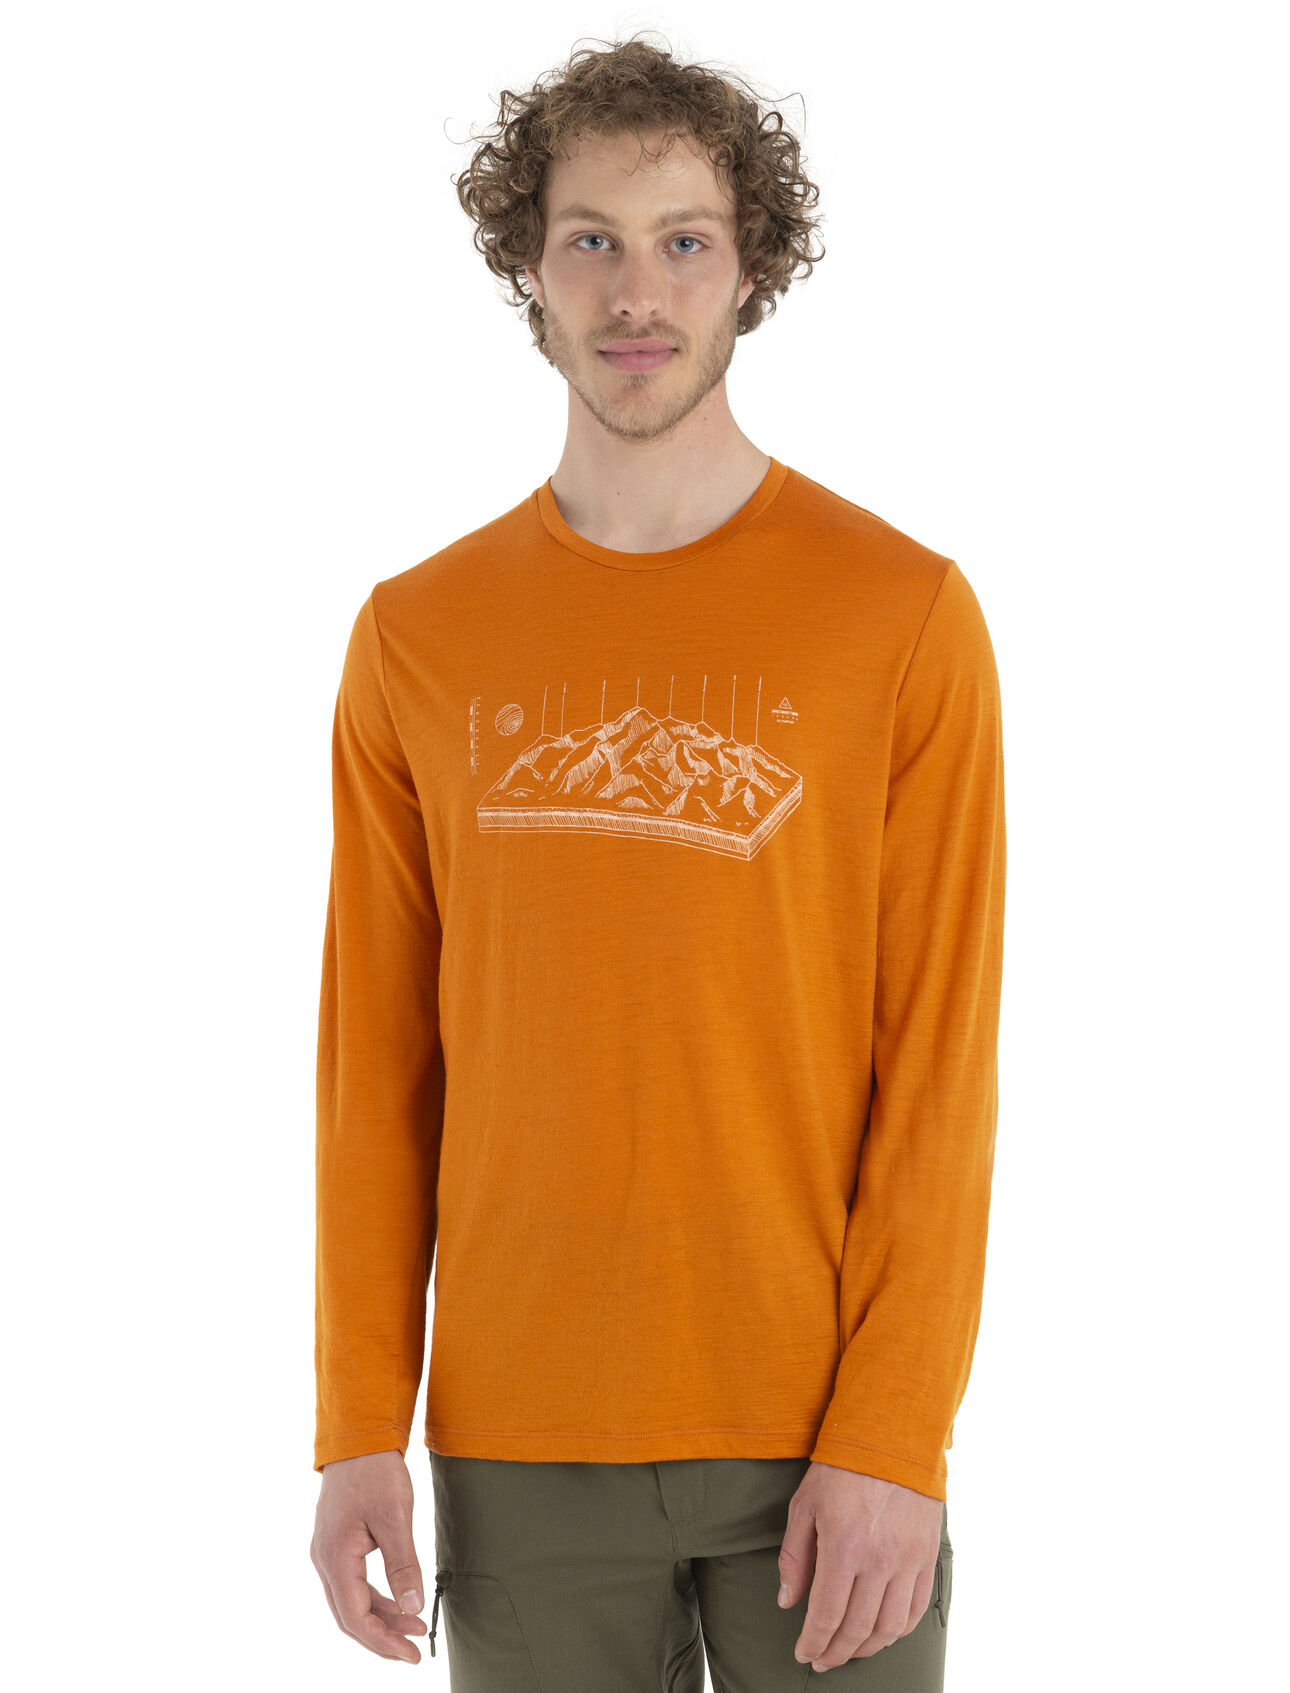 Mens Merino 150 Tech Lite II Long Sleeve T-Shirt Alps 3D Our versatile tech tee that provides comfort, breathability and odour-resistance for any adventure you can think of, the 150 Tech Lite II Long Sleeve Tee Alps 3D features 100% merino for all-natural performance. The tee’s original artwork features a hand-drawn sketch inspired by the Mont Blanc region of the Alps.